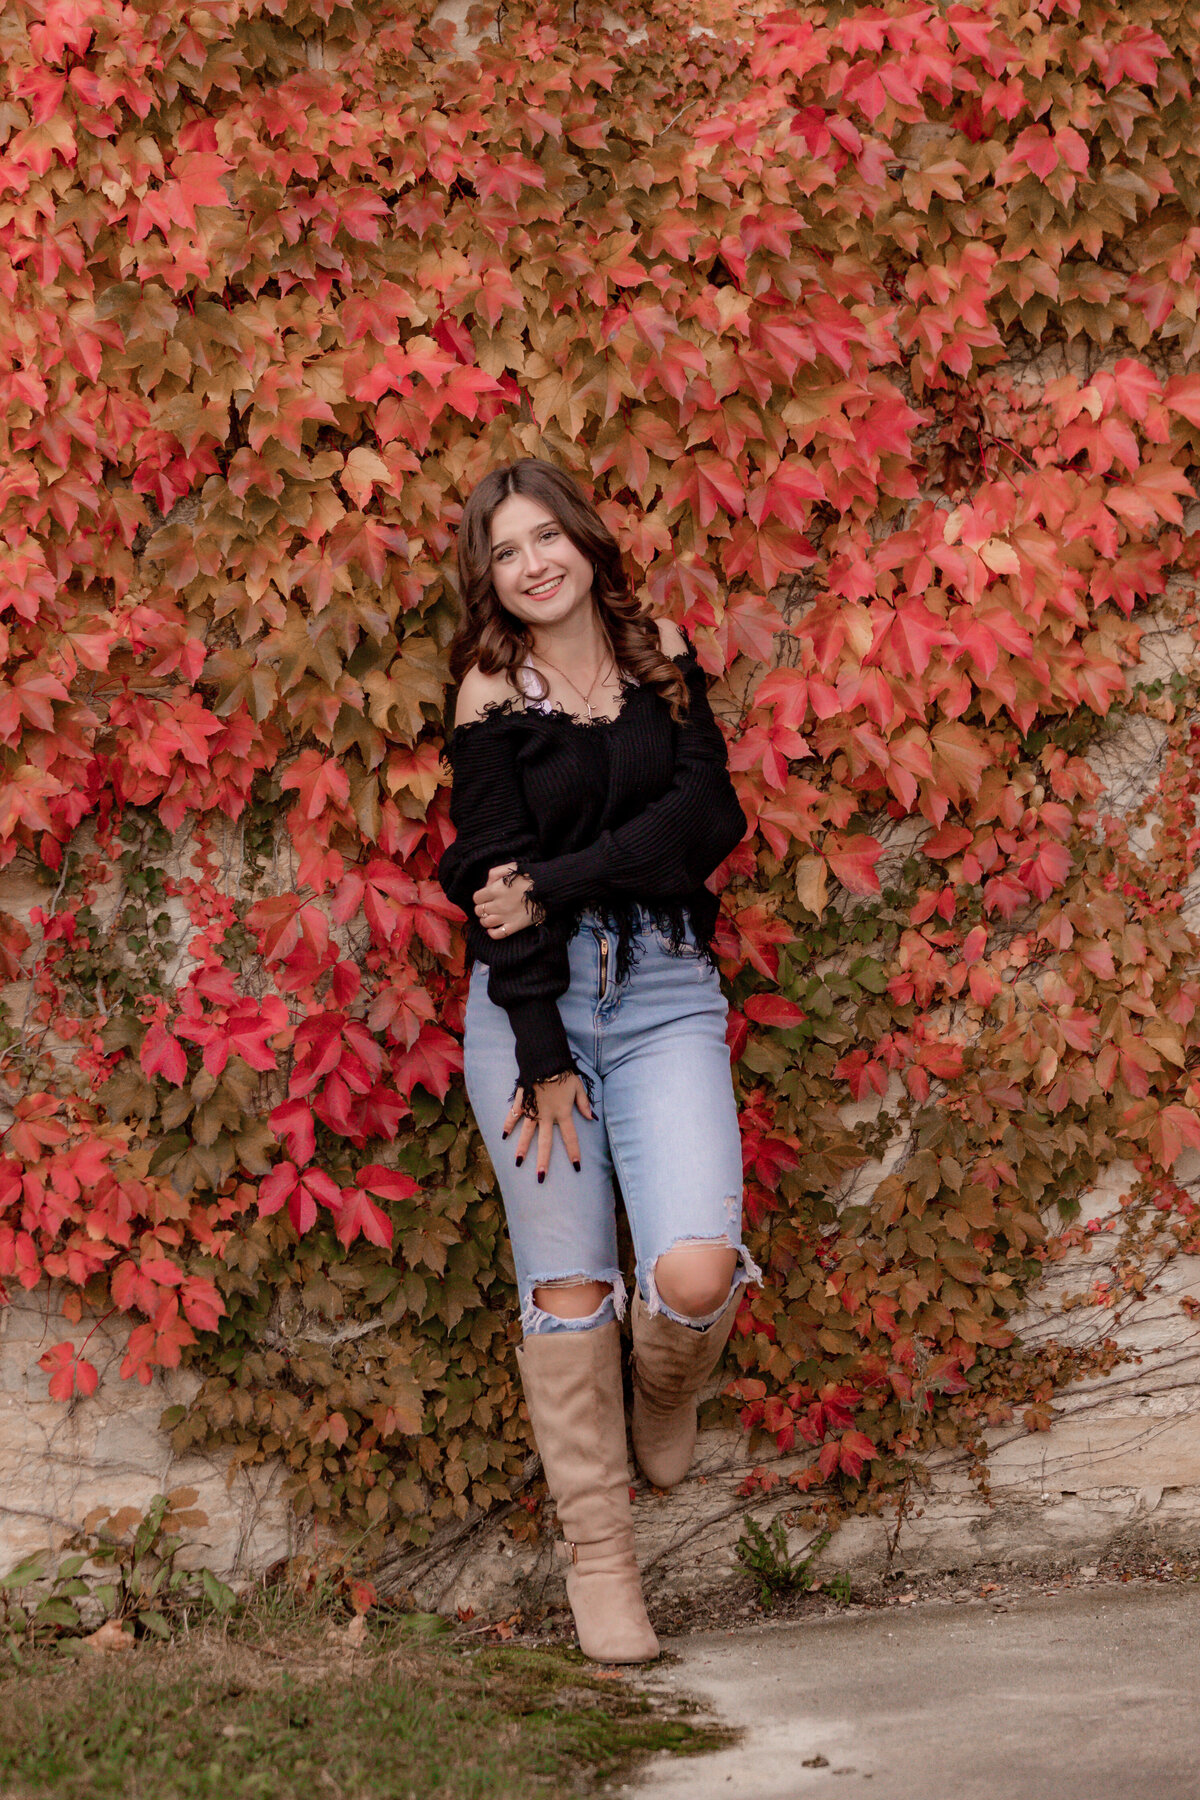 A brunette leans against a fall colored ivy wall with one foot up and her hand across her body.